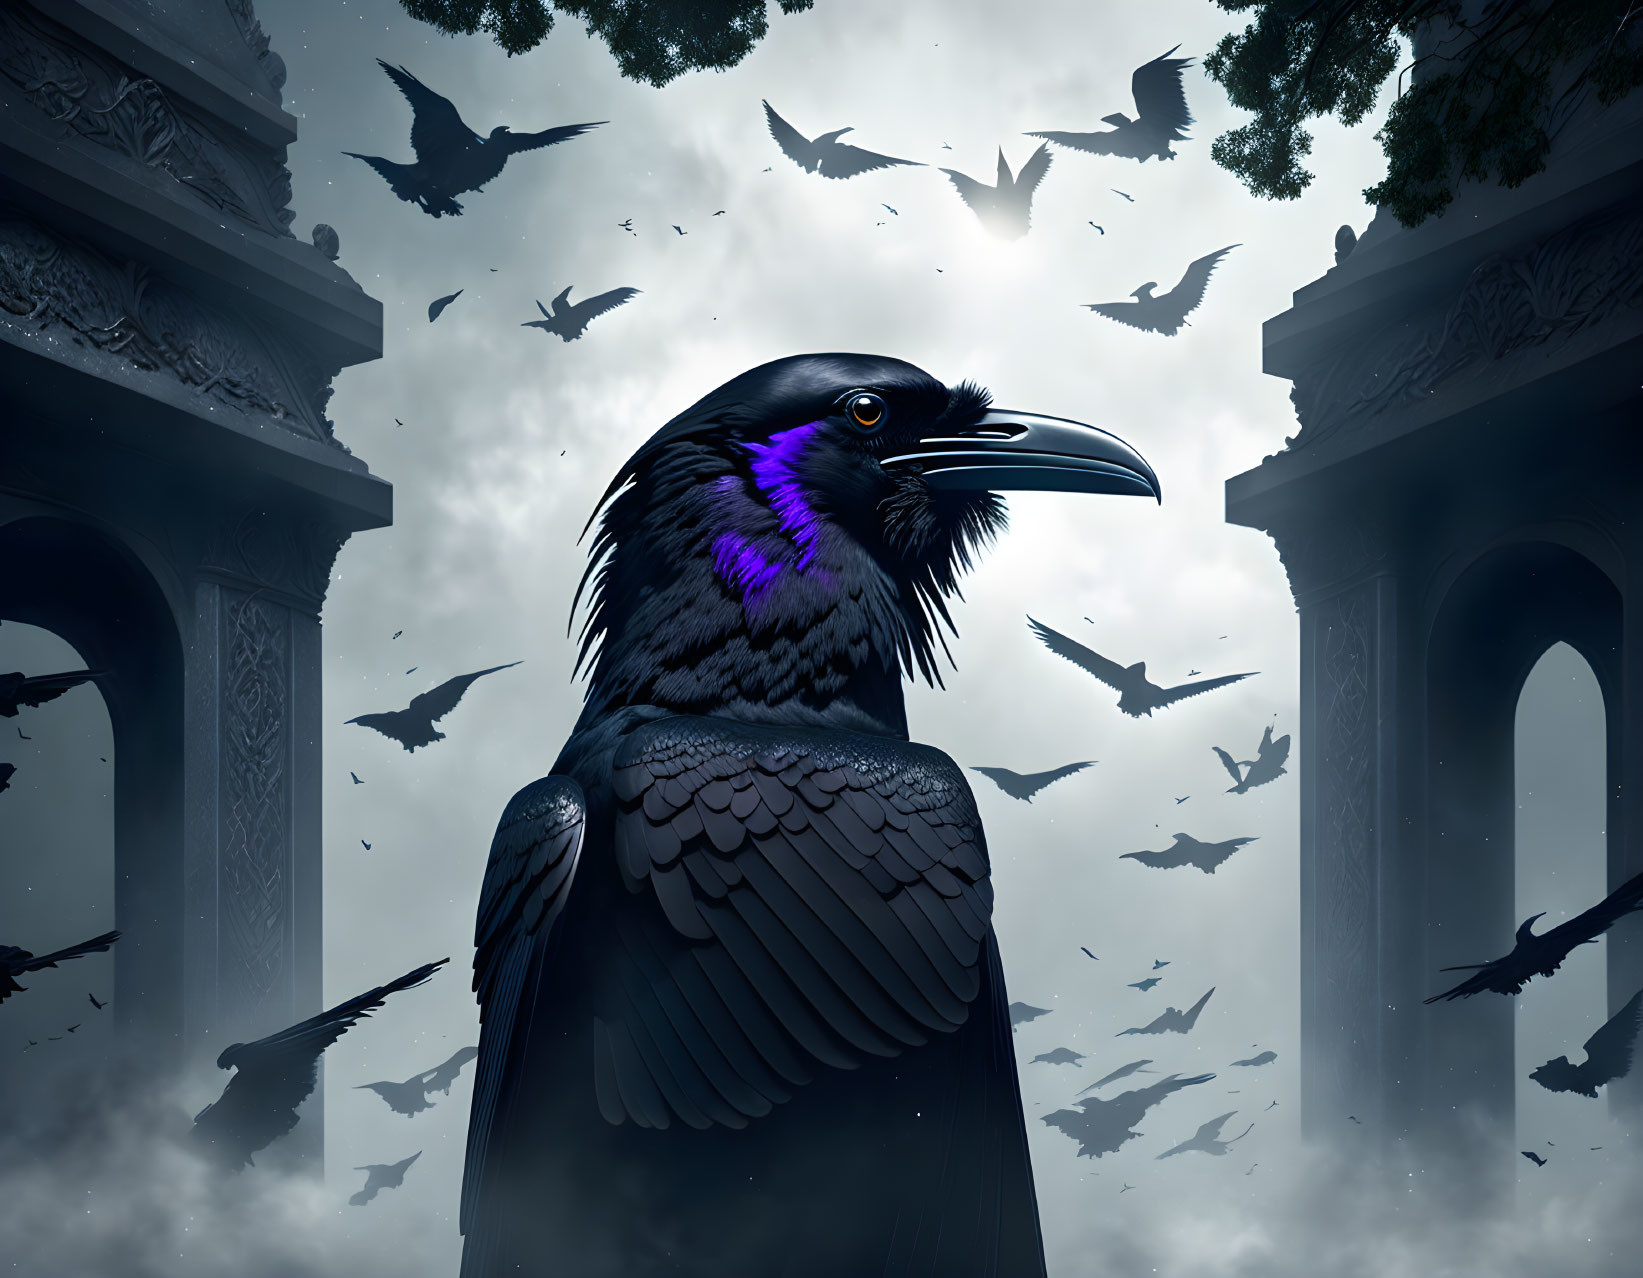 Black raven with purple neck by archway and flying birds